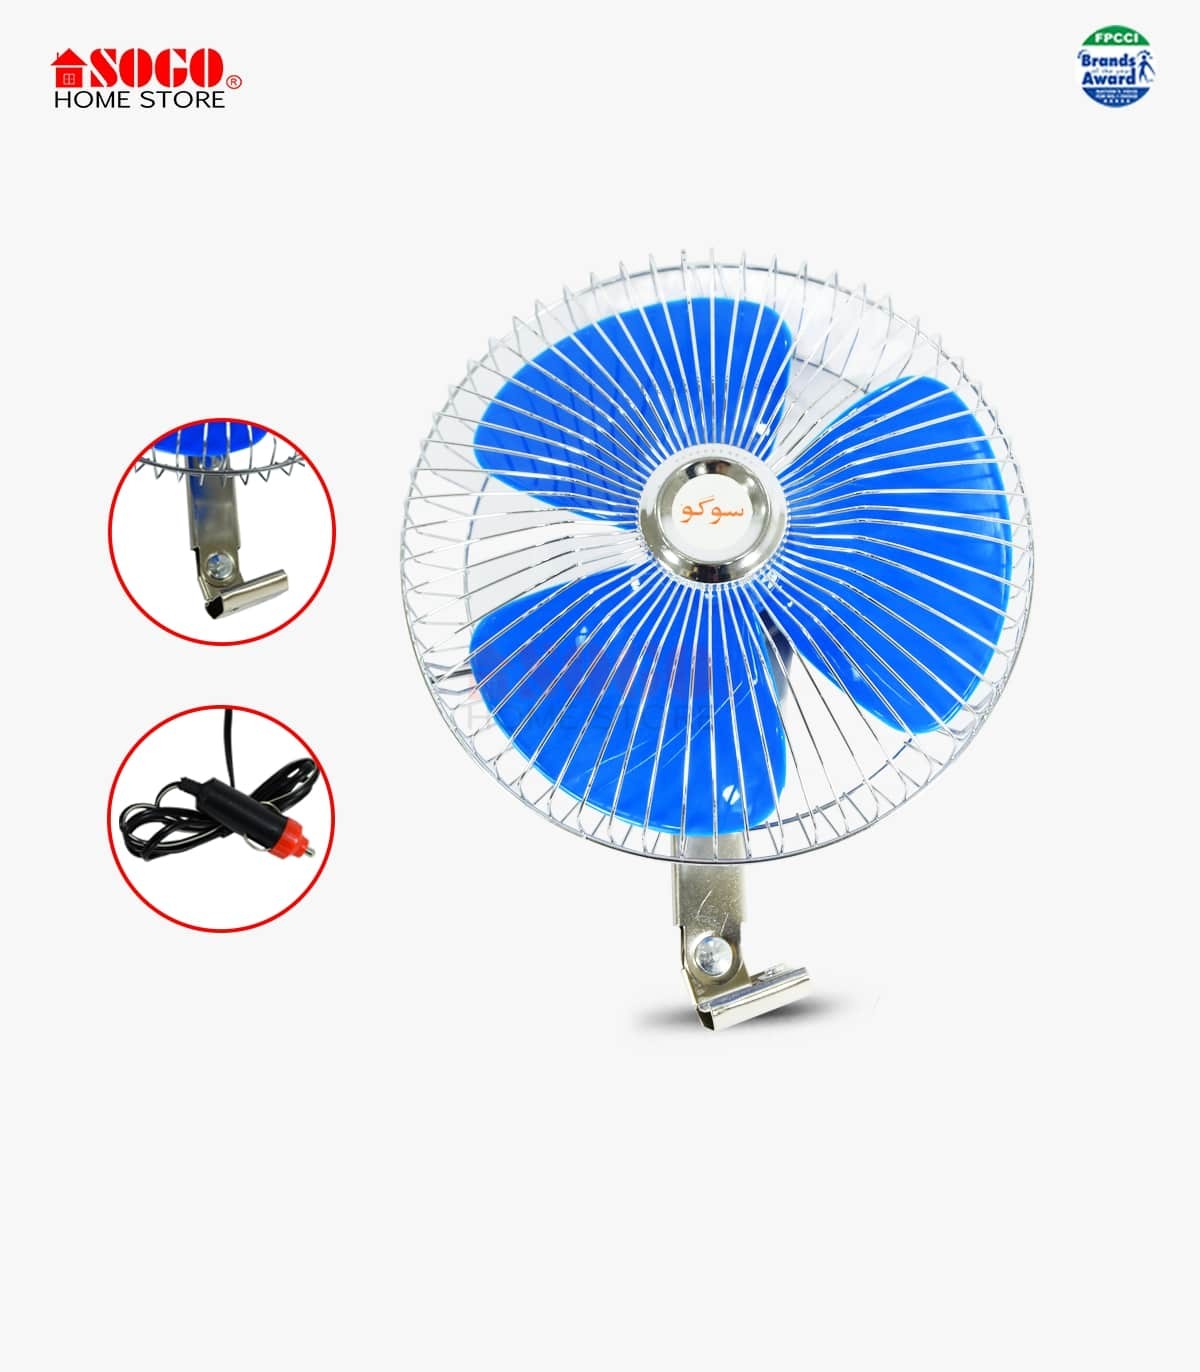 Sogo Car Fan 8 inches Fan (12Volt) is the cheapest and Market